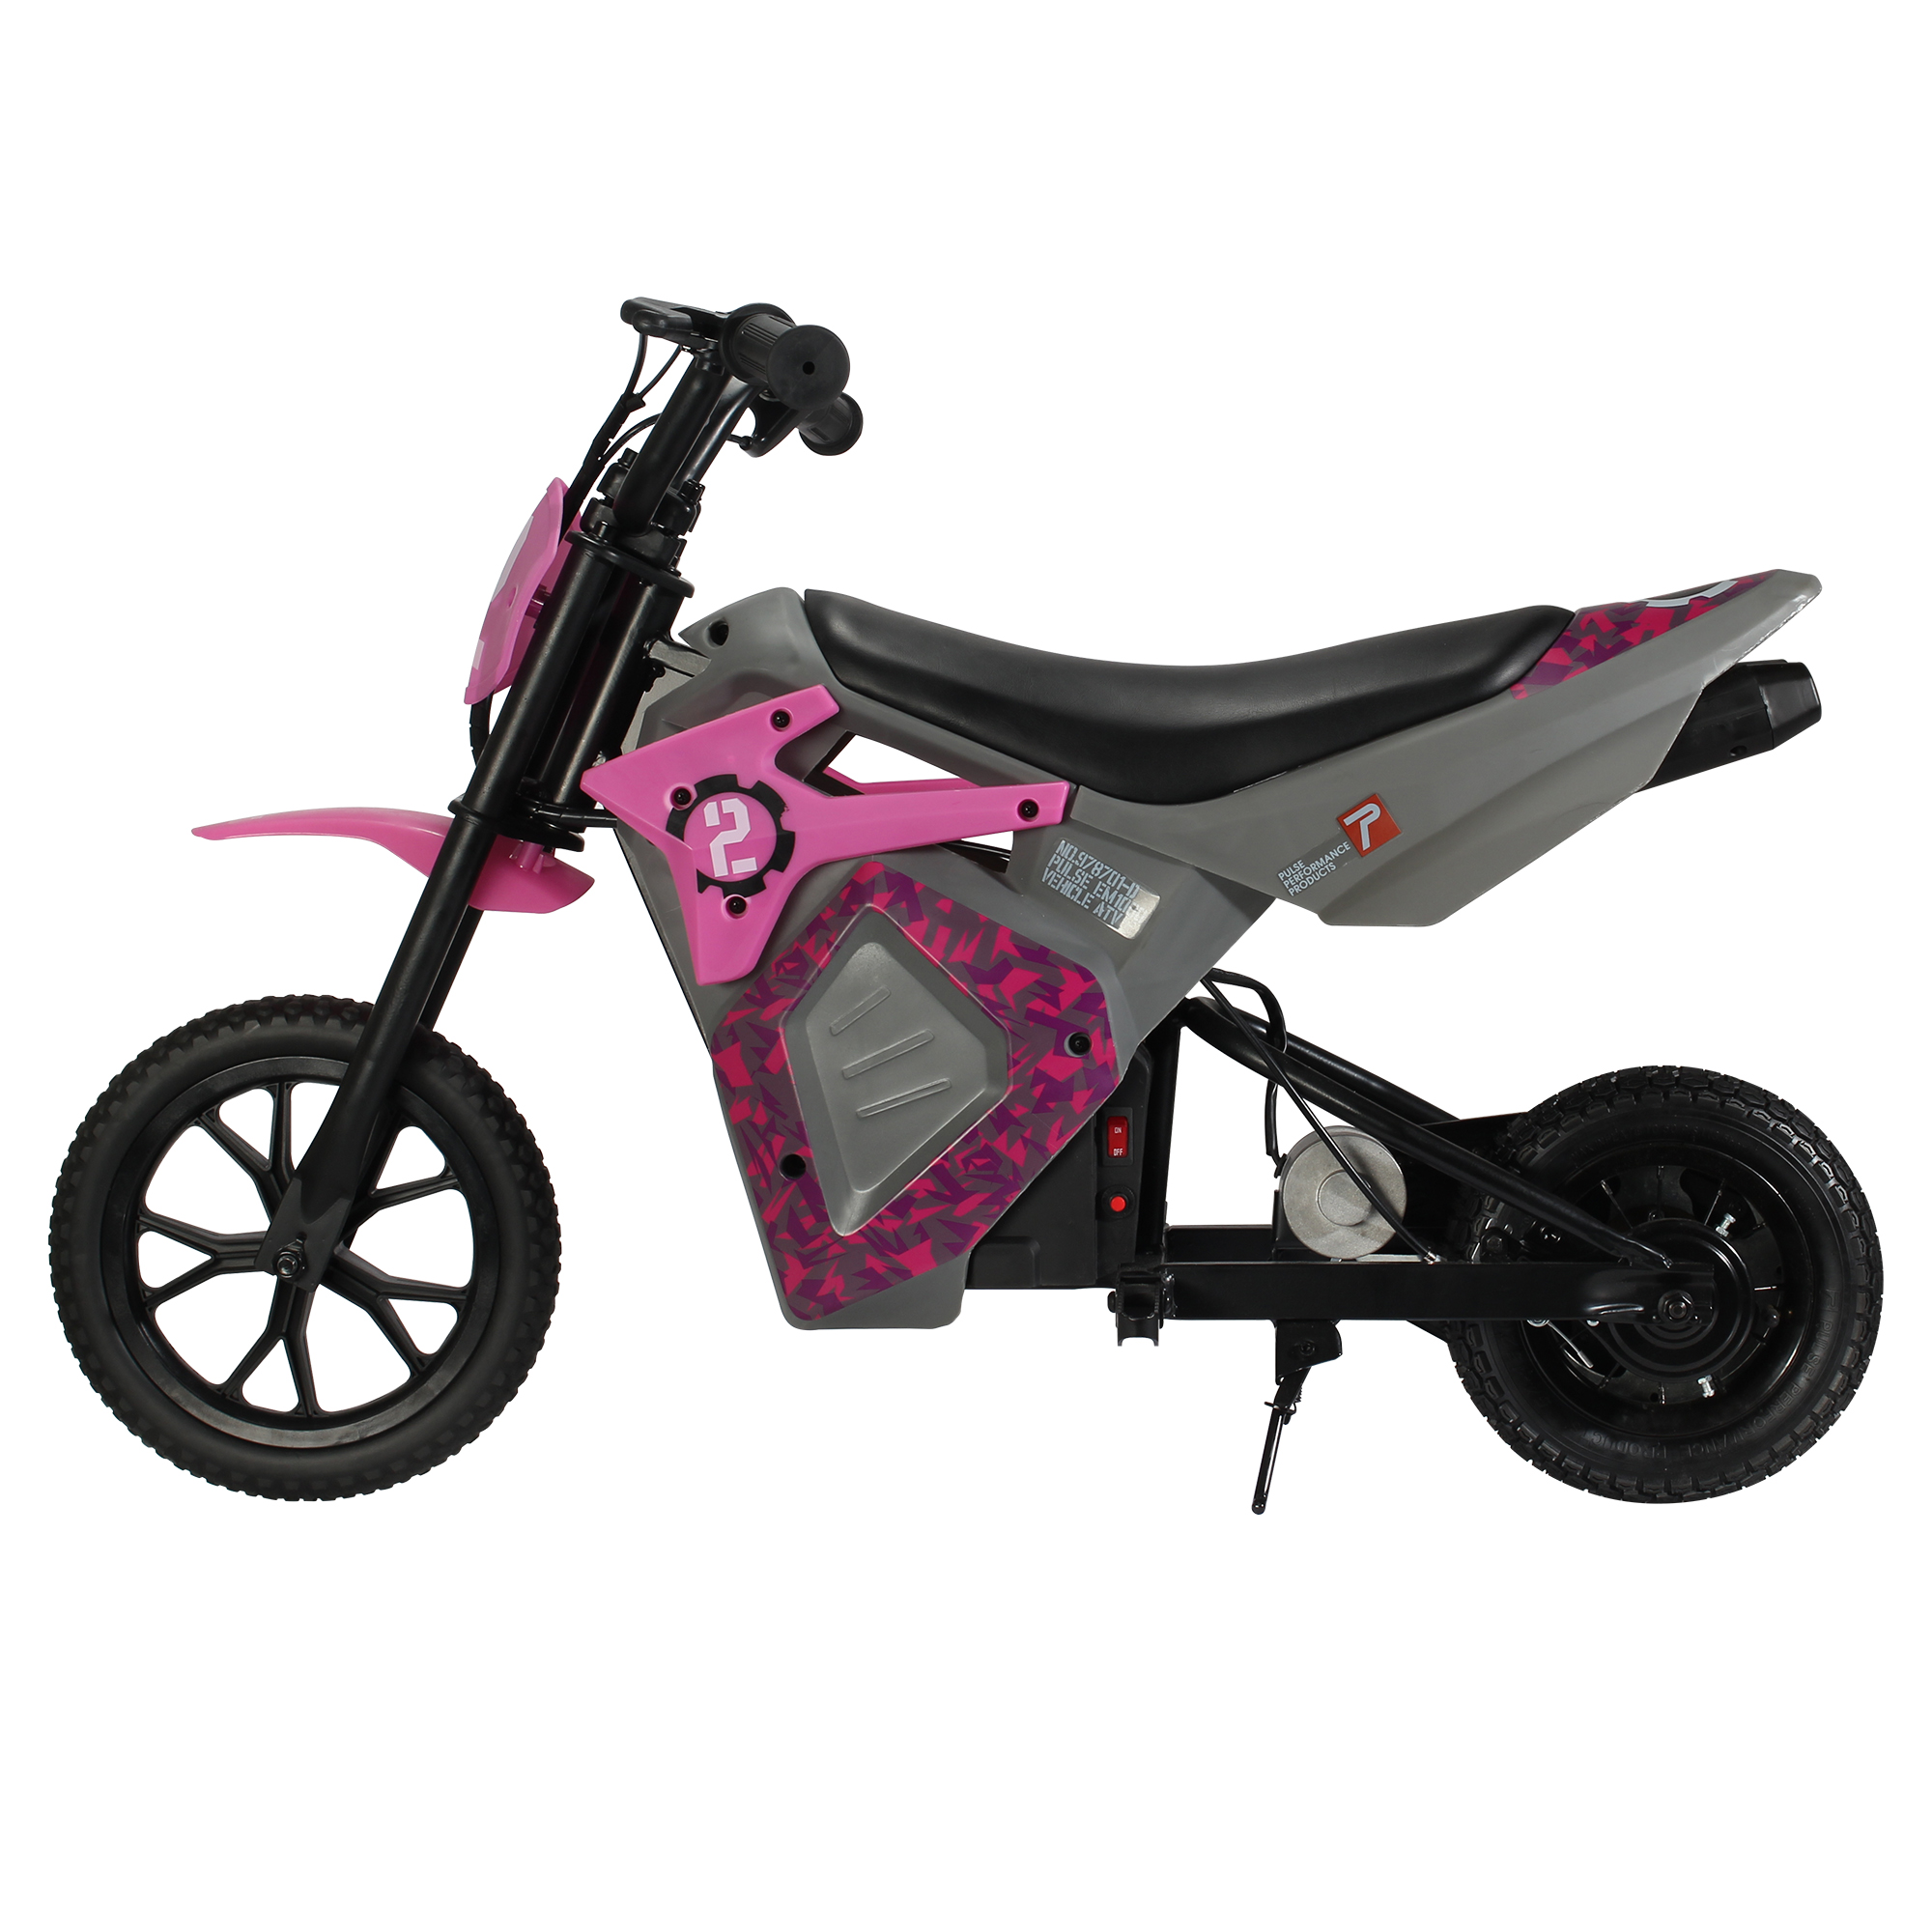 Pulse Performance Products, EM-1000 Kids Electric Motorcycle, Ages 8+, 24V battery, 10 MPH, Puncture Proof Tires, hand Brake - image 5 of 8